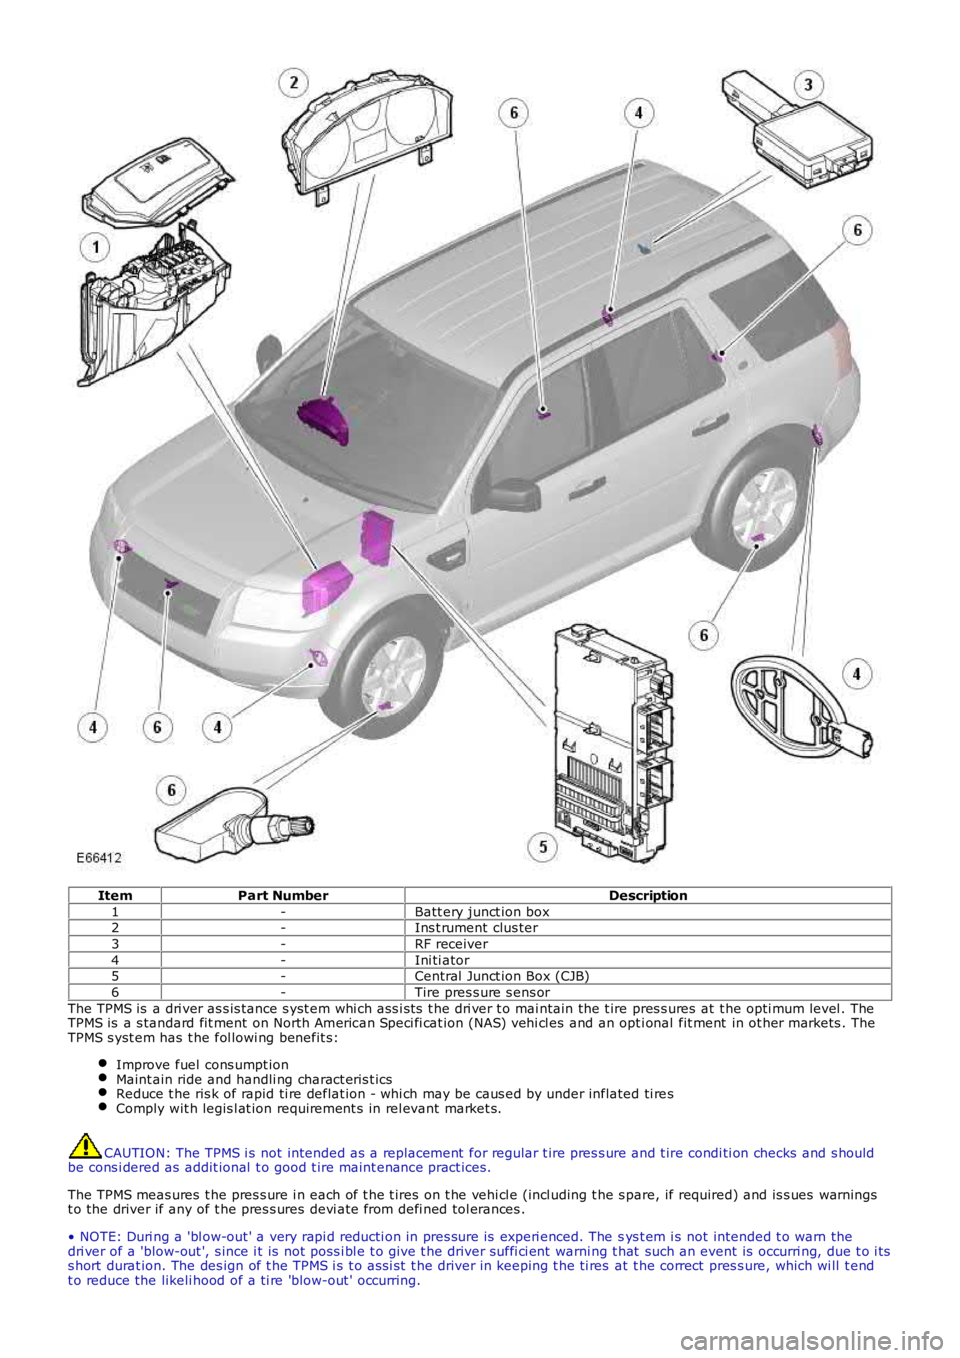 LAND ROVER FRELANDER 2 2006  Repair Manual ItemPart NumberDescription
1-Batt ery junct ion box2-Ins t rument  clus ter
3-RF receiver
4-Ini ti ator5-Central  Junct ion Box (CJB)
6-Tire pres s ure s ens or
The TPMS is  a dri ver as s is tance s 